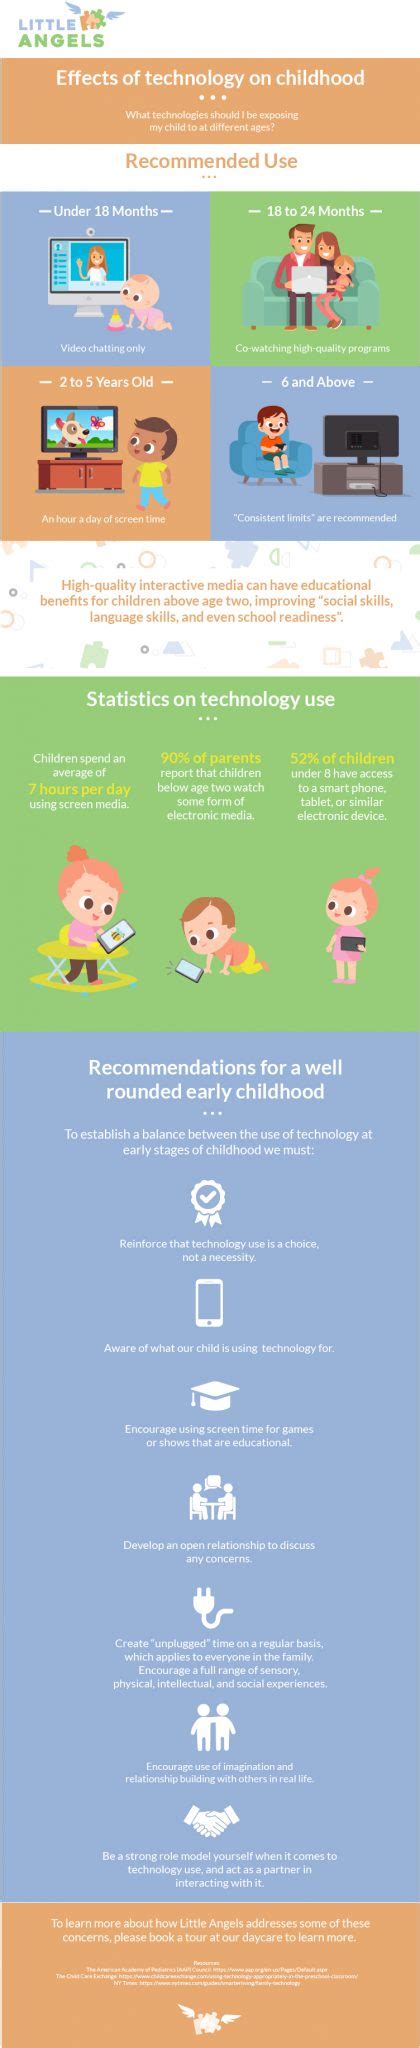 Effects Of Technology On Childhood Infographic Little Angels